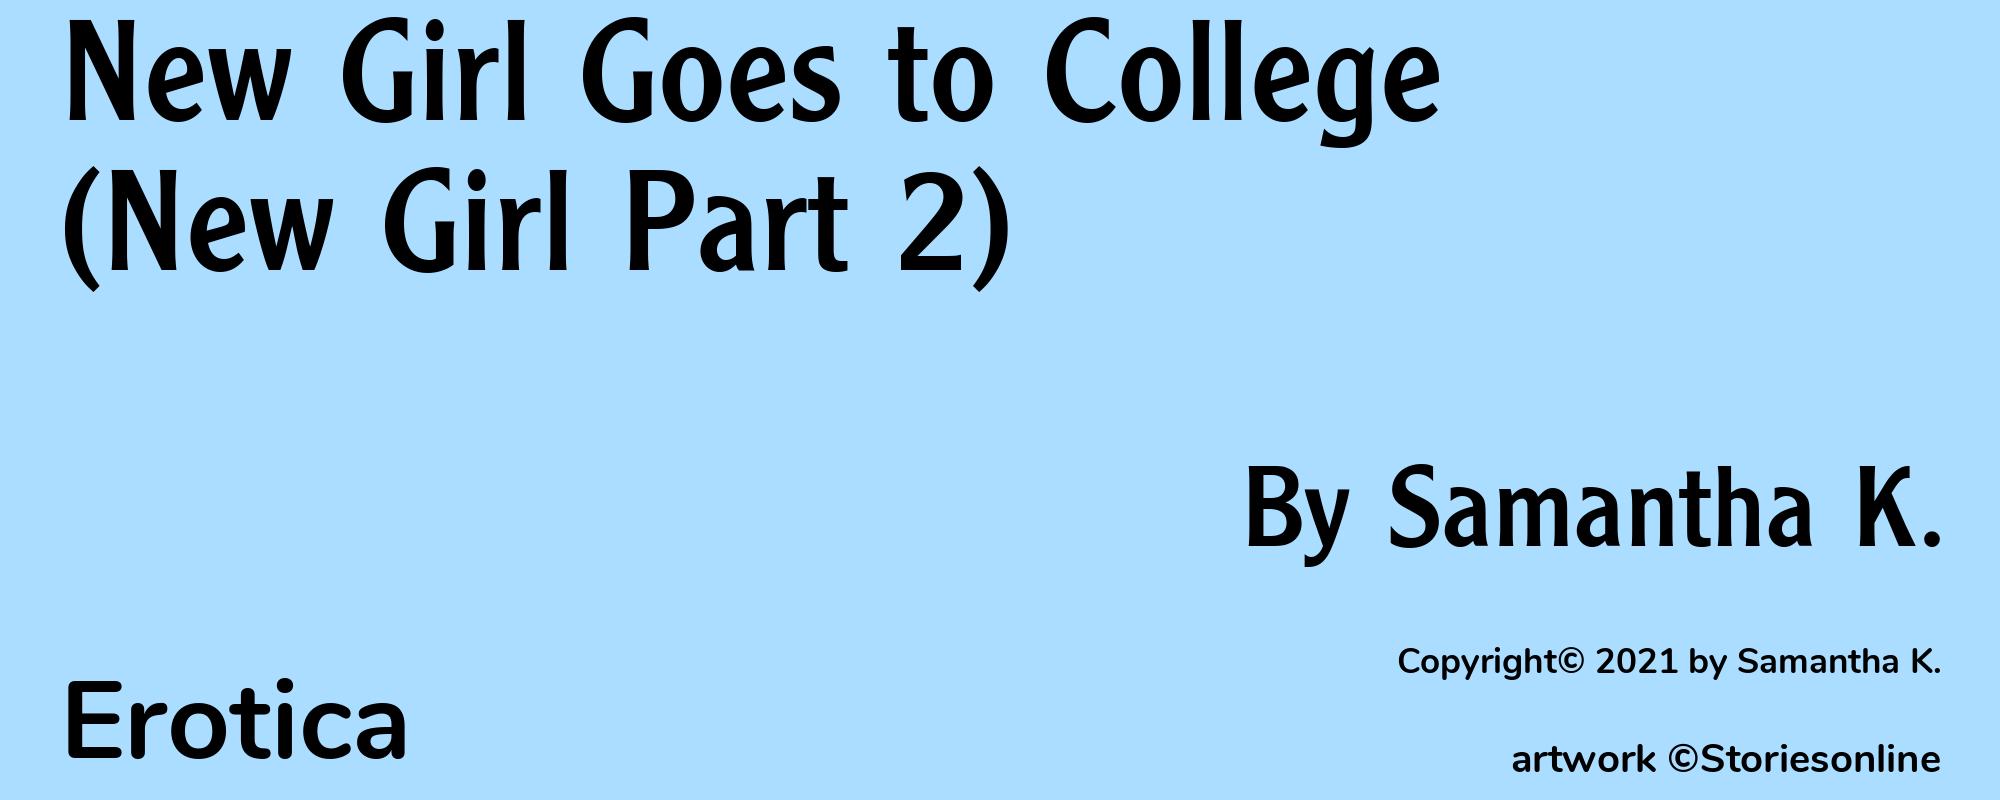 New Girl Goes to College (New Girl Part 2) - Cover